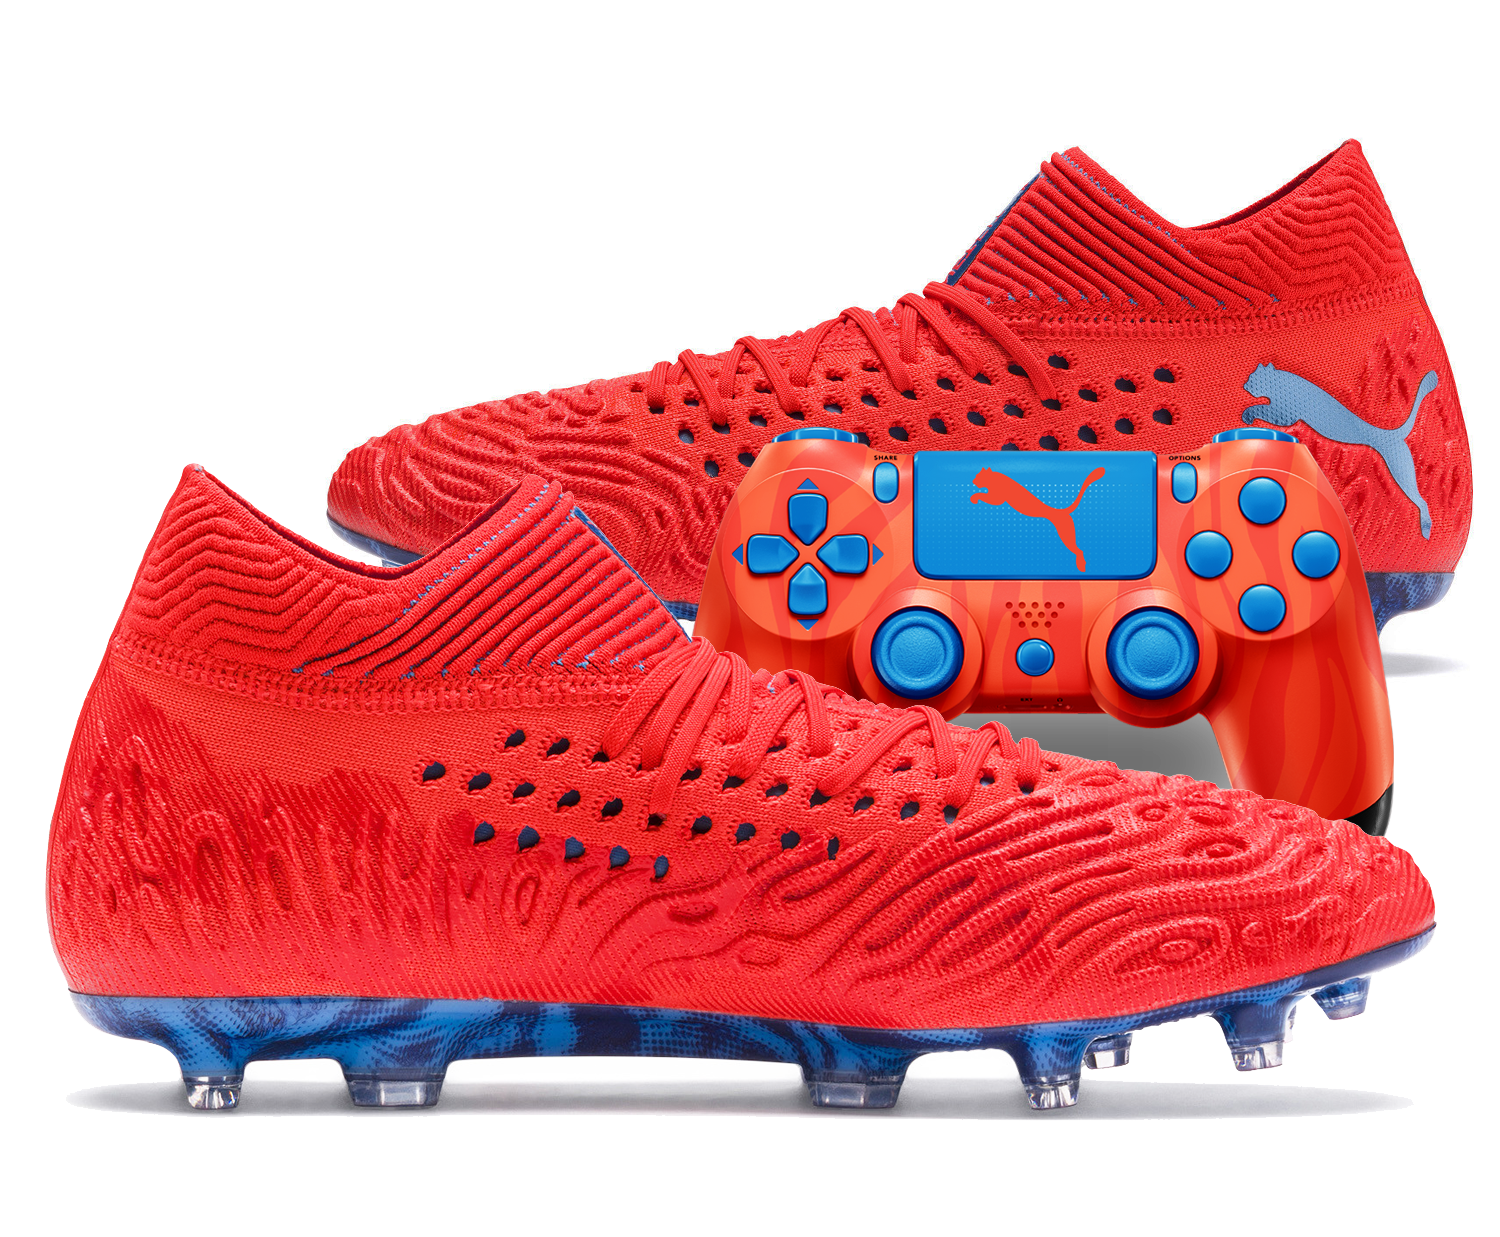 Puma Football - The Power Up Pack 